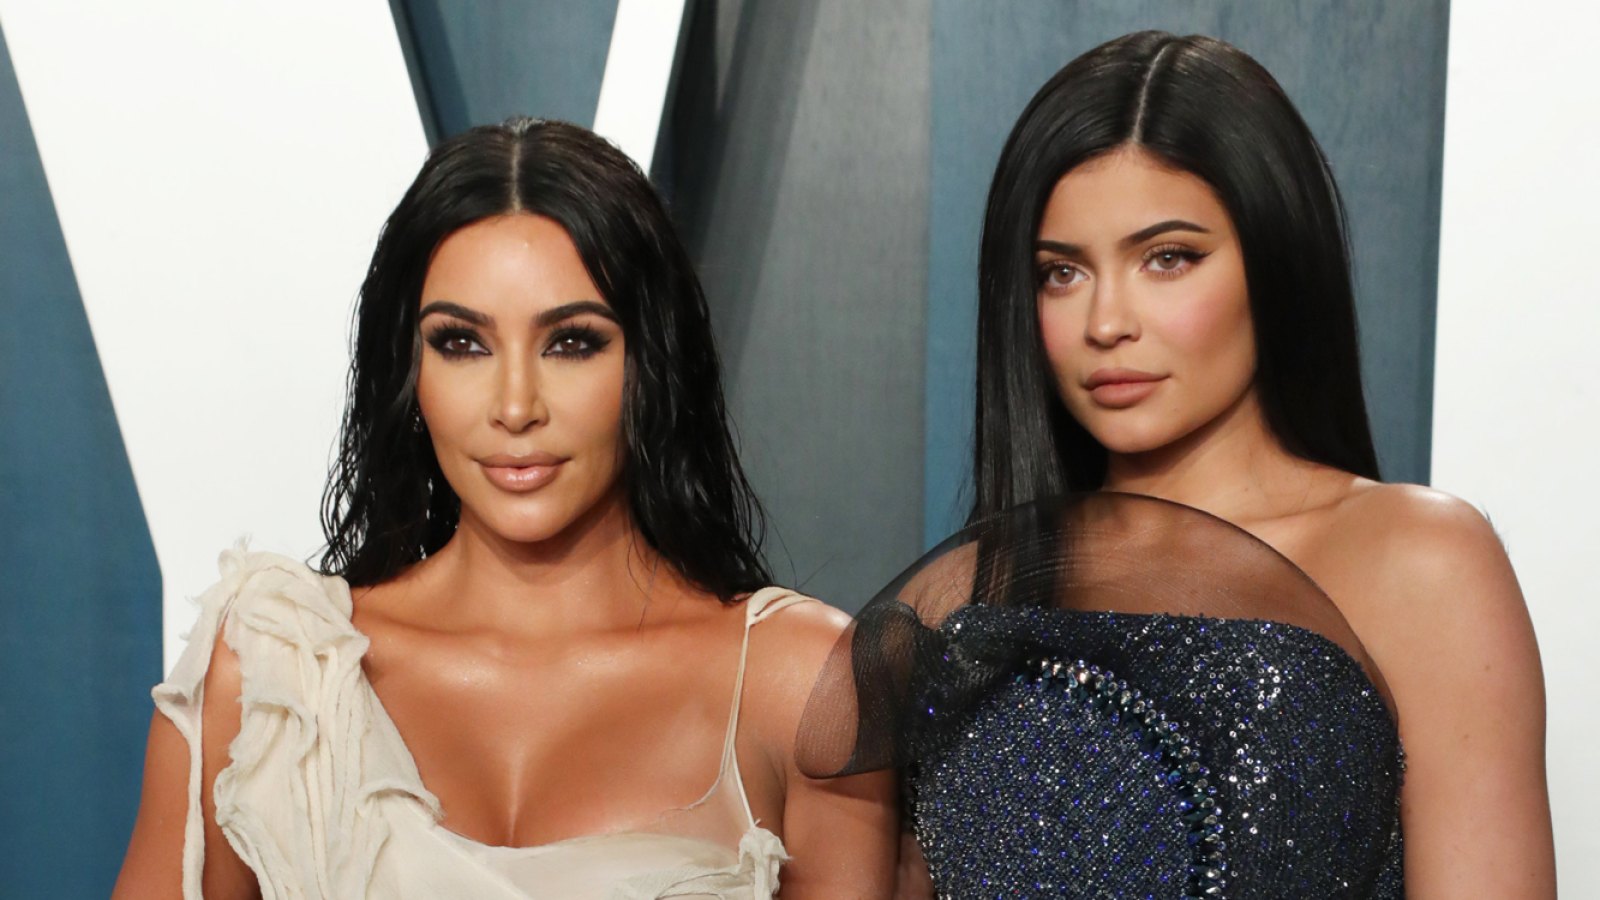 Kim K Asks Kylie to Tag Skims in New Post